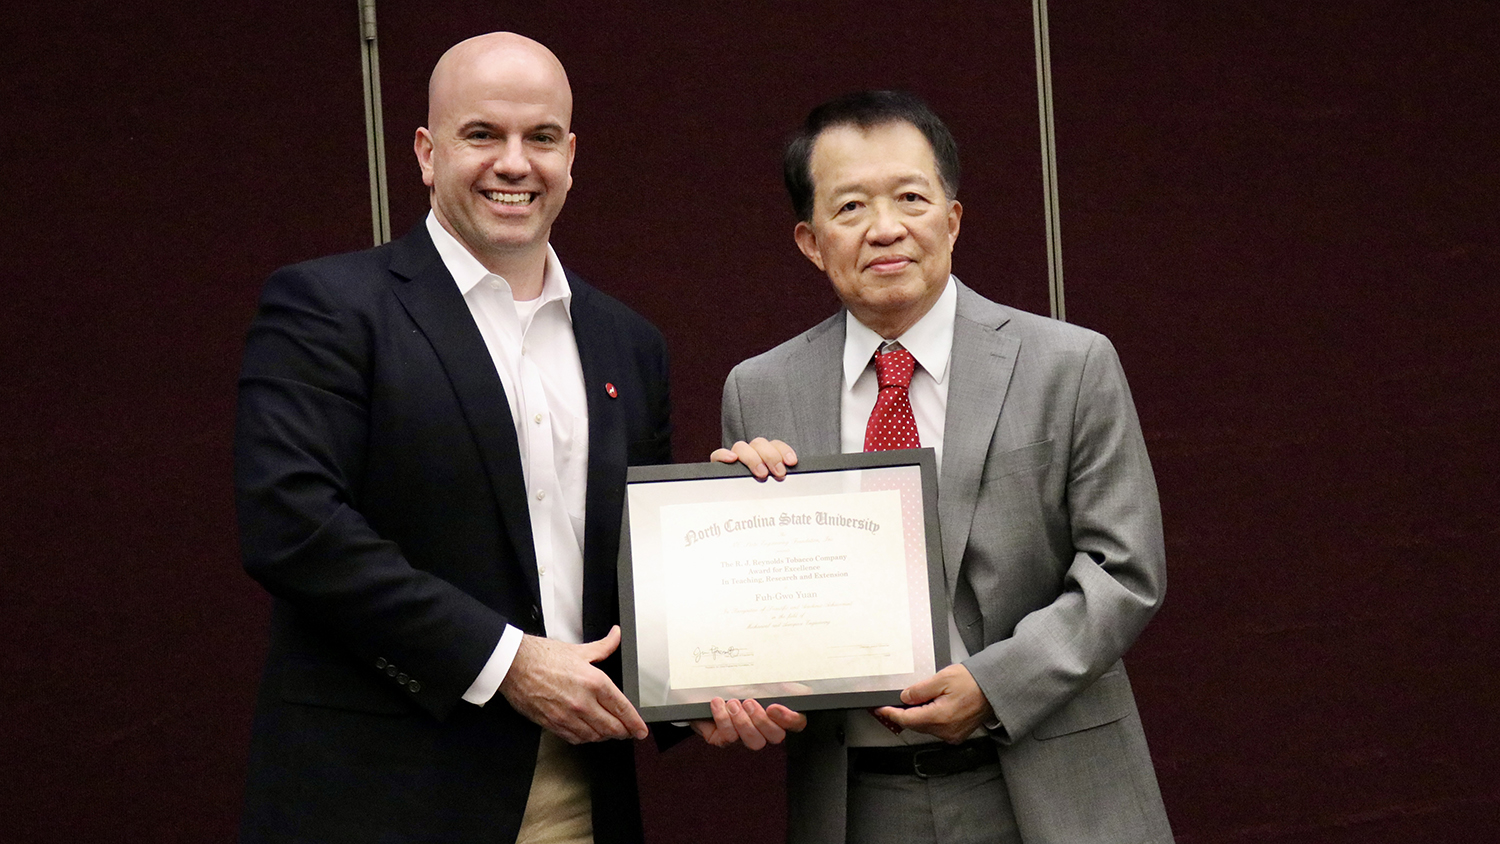 Dean Jim Pfaendtner, left, presents Fuh-Gwo Yuan the 2023 R.J. Reynolds Tobacco Company Award for Excellence in Teaching, Research and Extension.